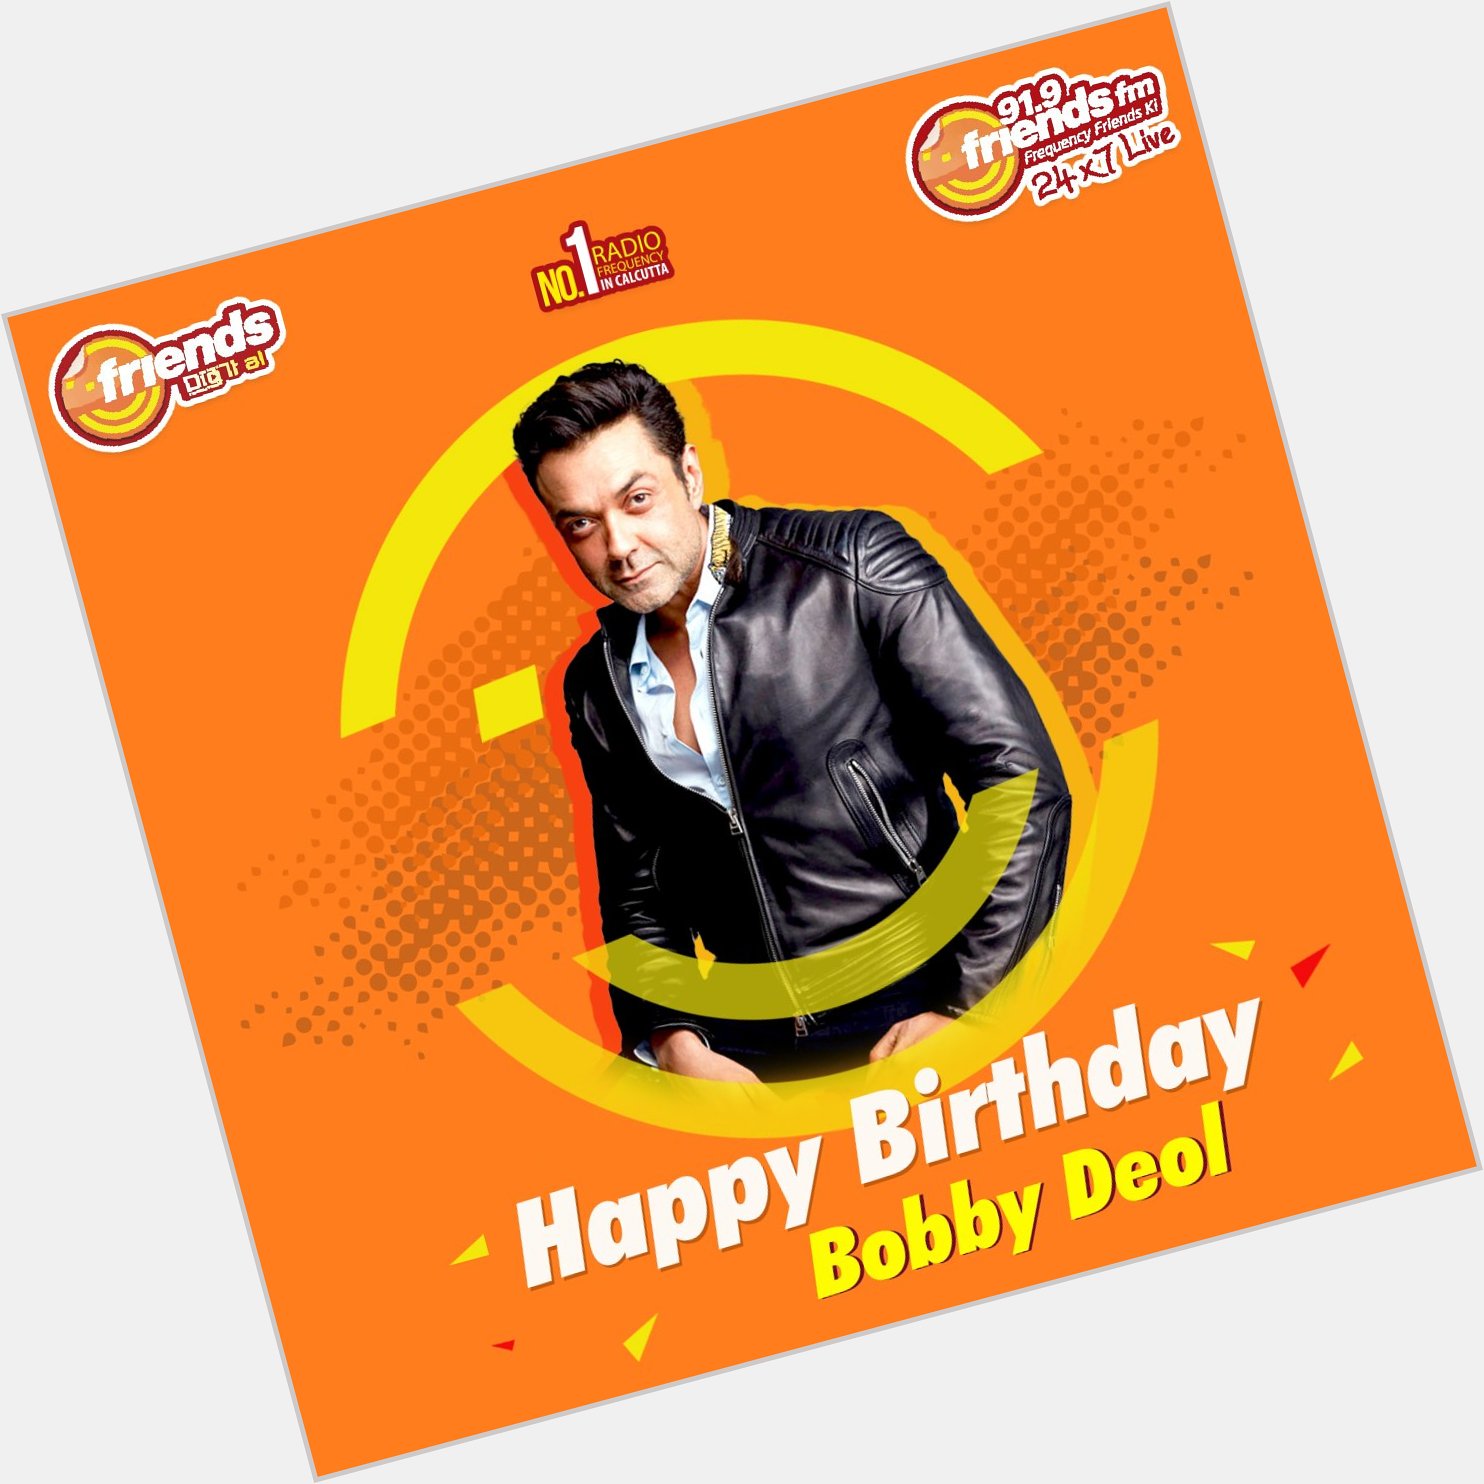 Happy birthday to our very Soldier, Bobby Deol   